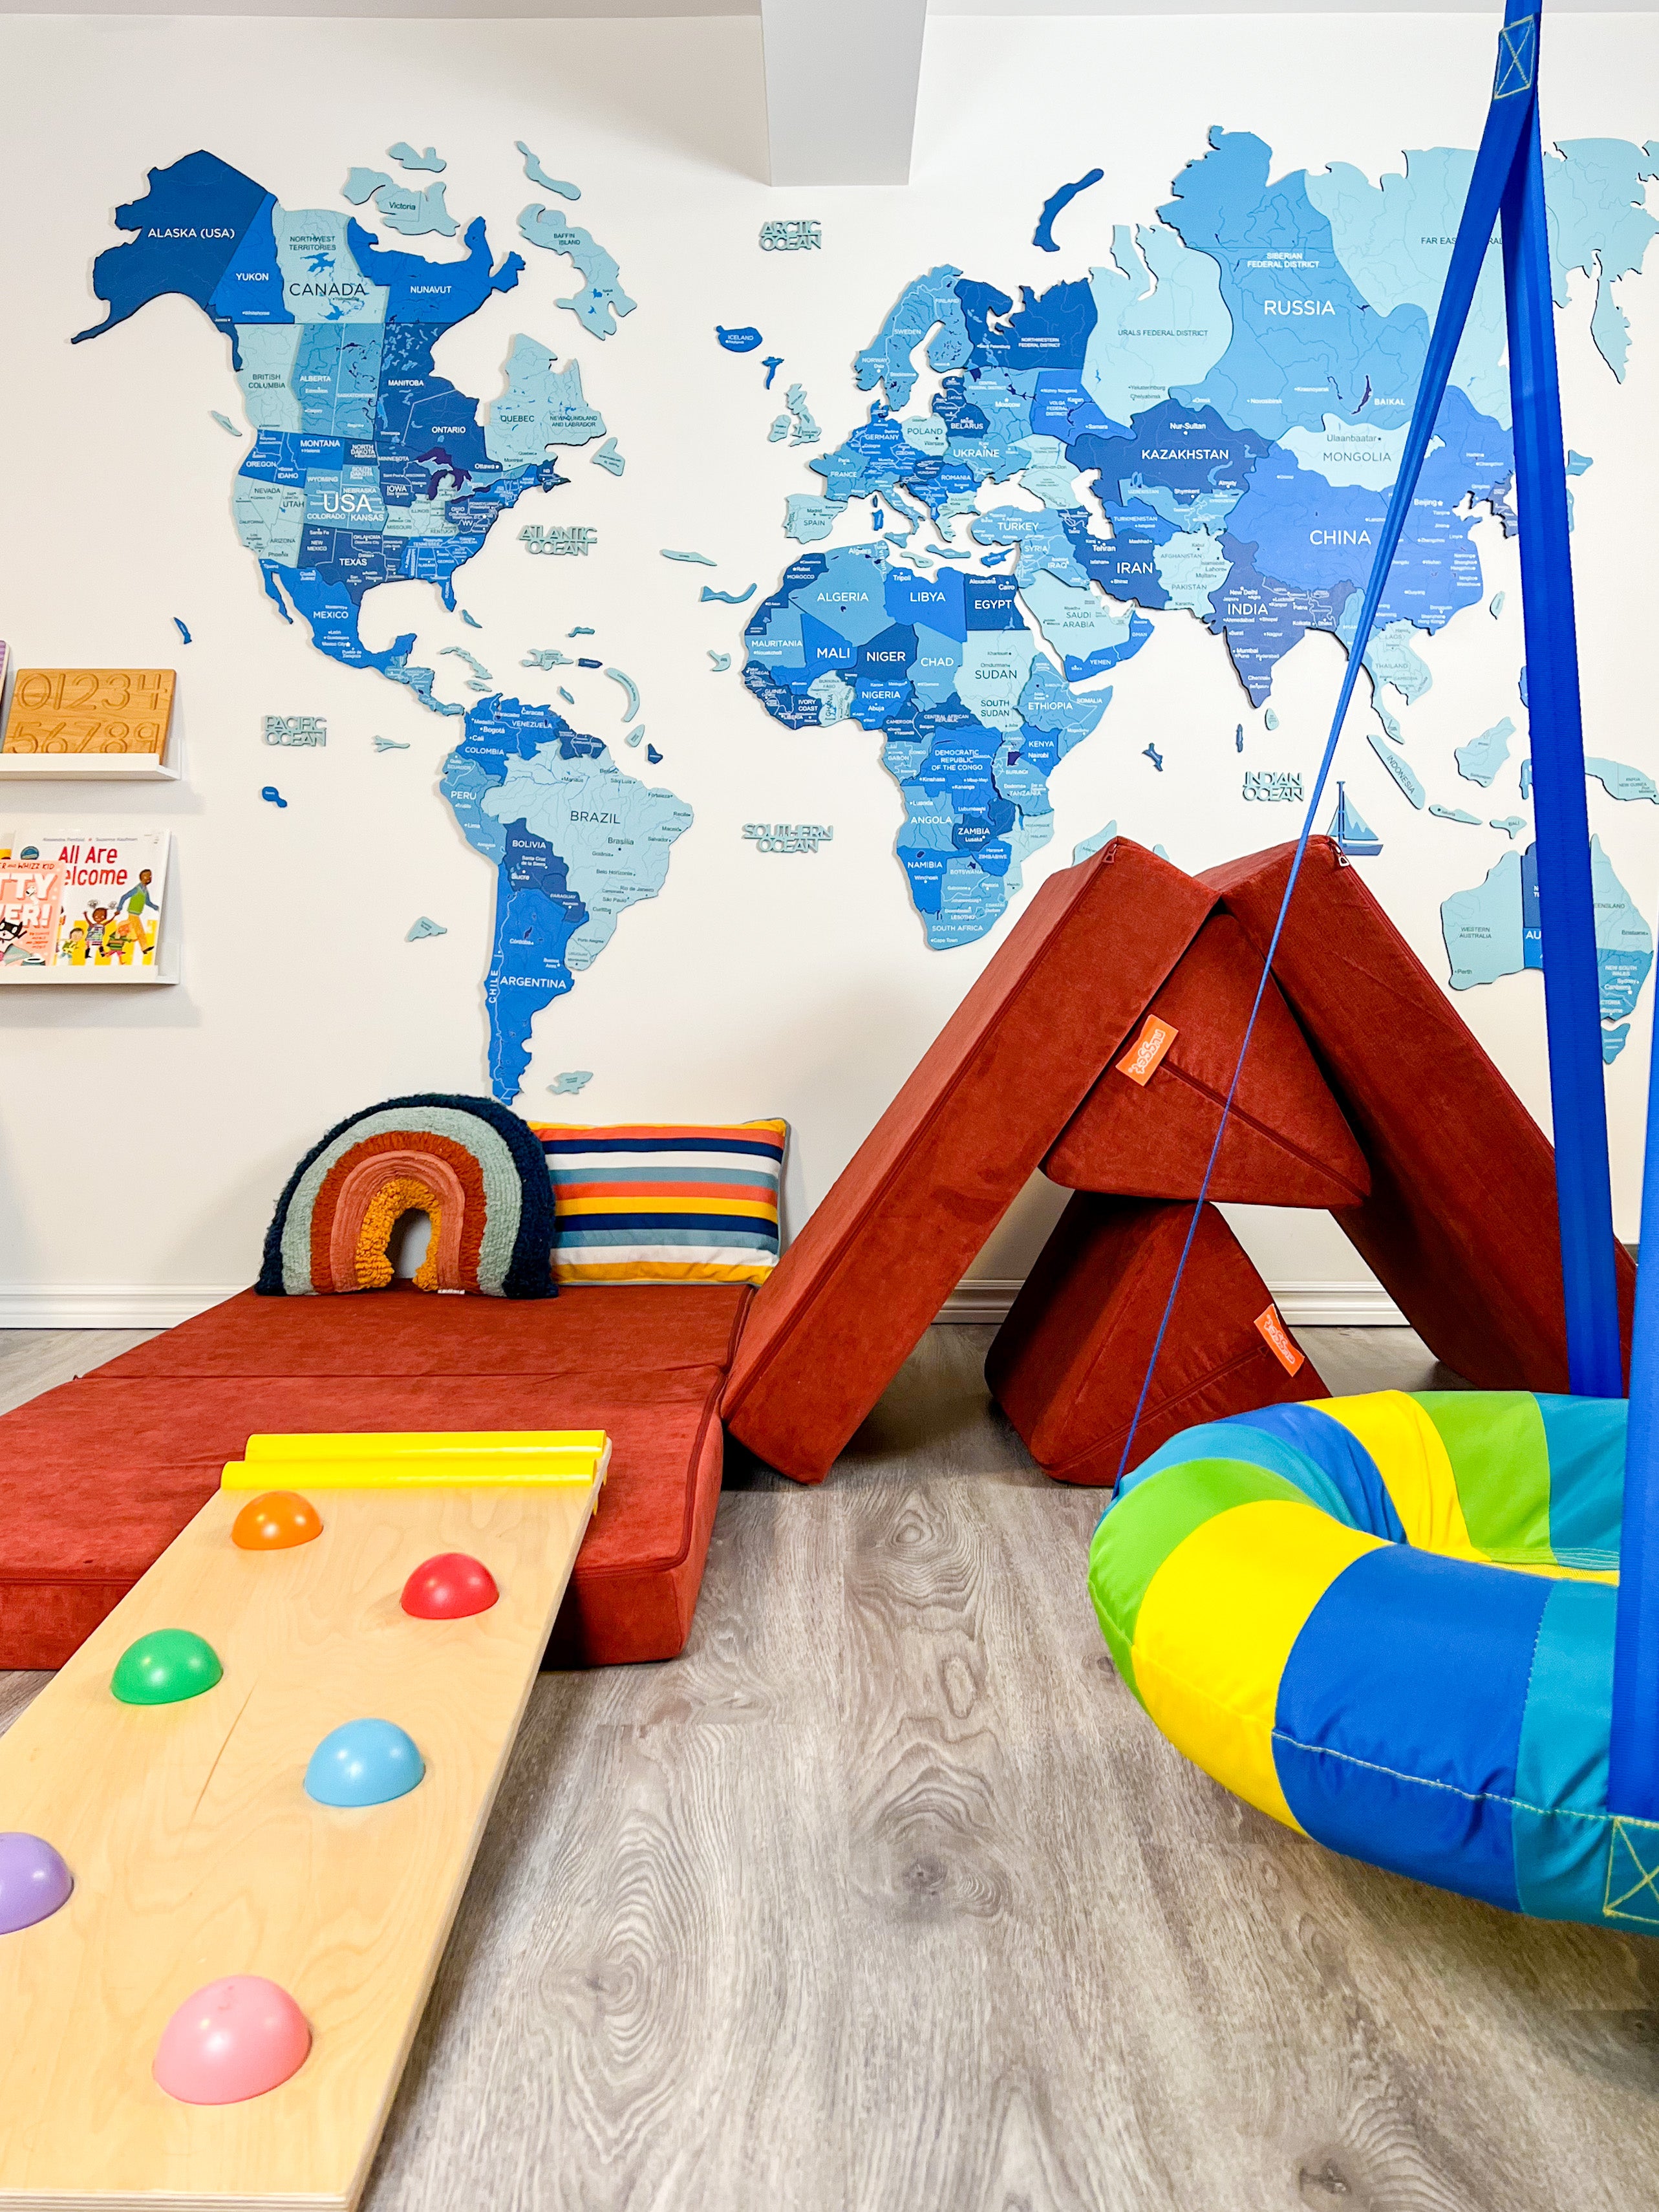 An indoor playground, complete with climbing ramp, swing, and Nugget build. A colorful world map is on the background wall.